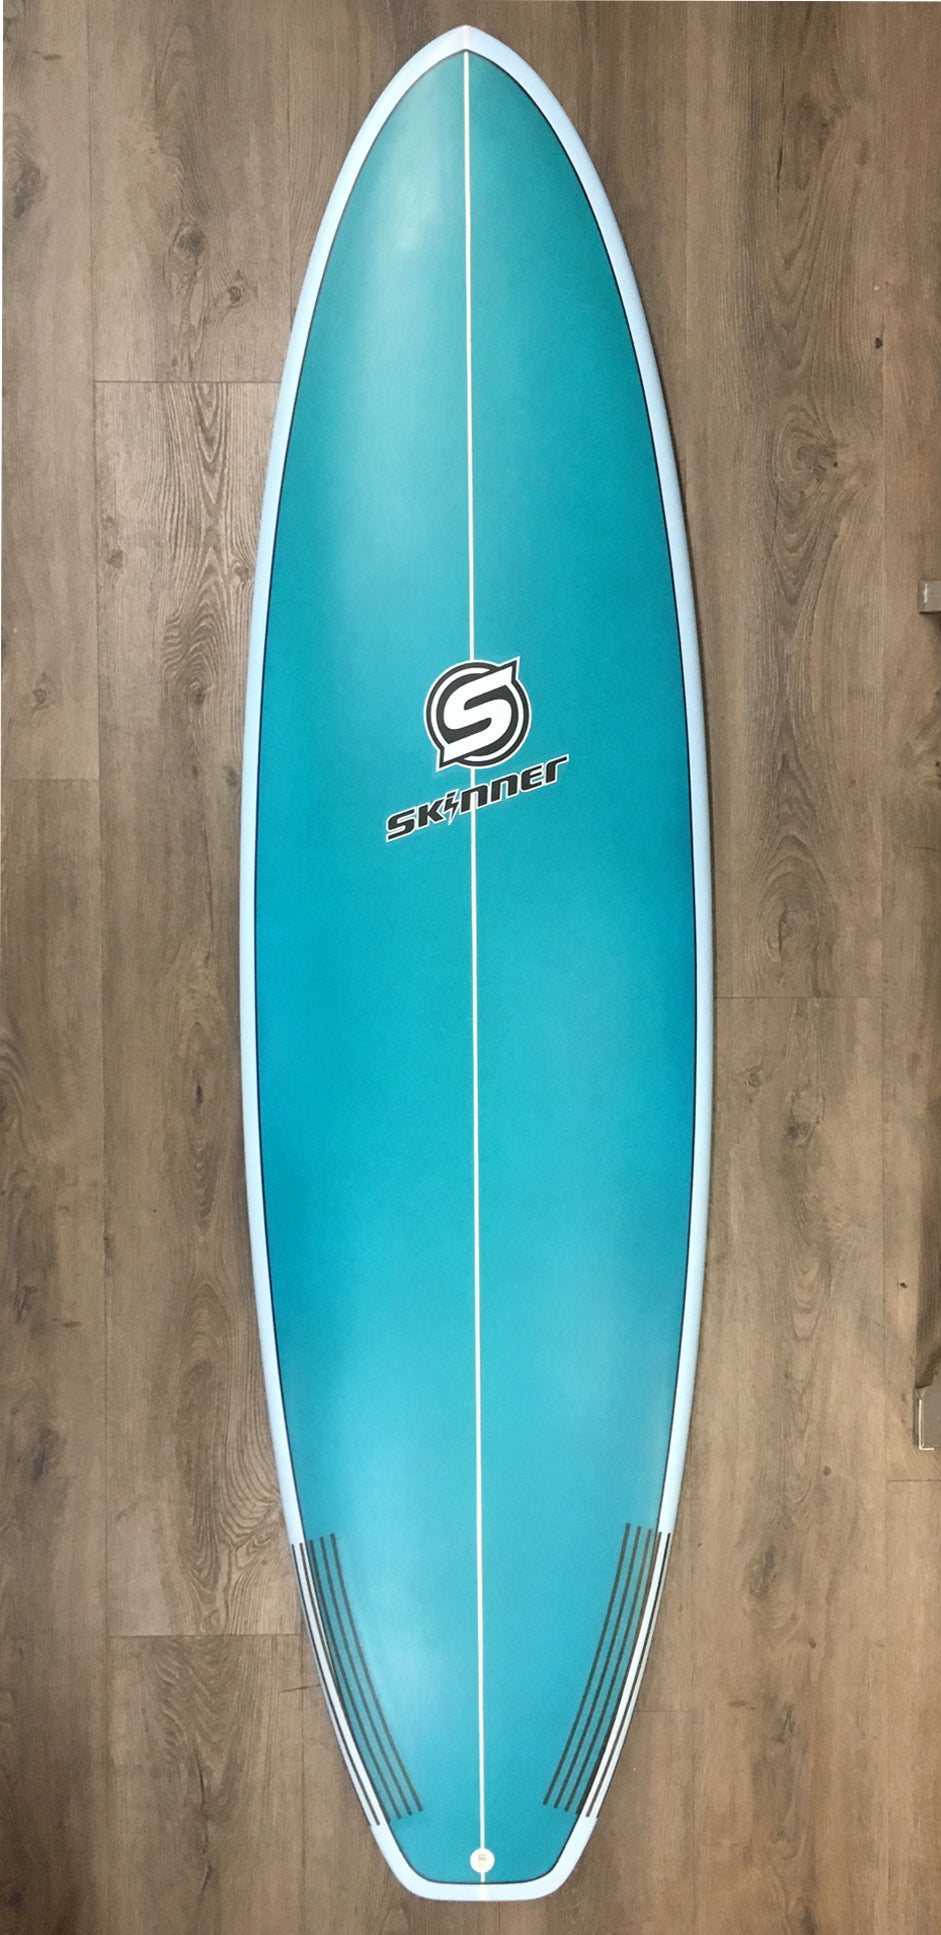 SOLD Skinner Surfboards 7'2" x 22.65" x 2.75" Performance Funshape Squash Tail Poly Surfboard